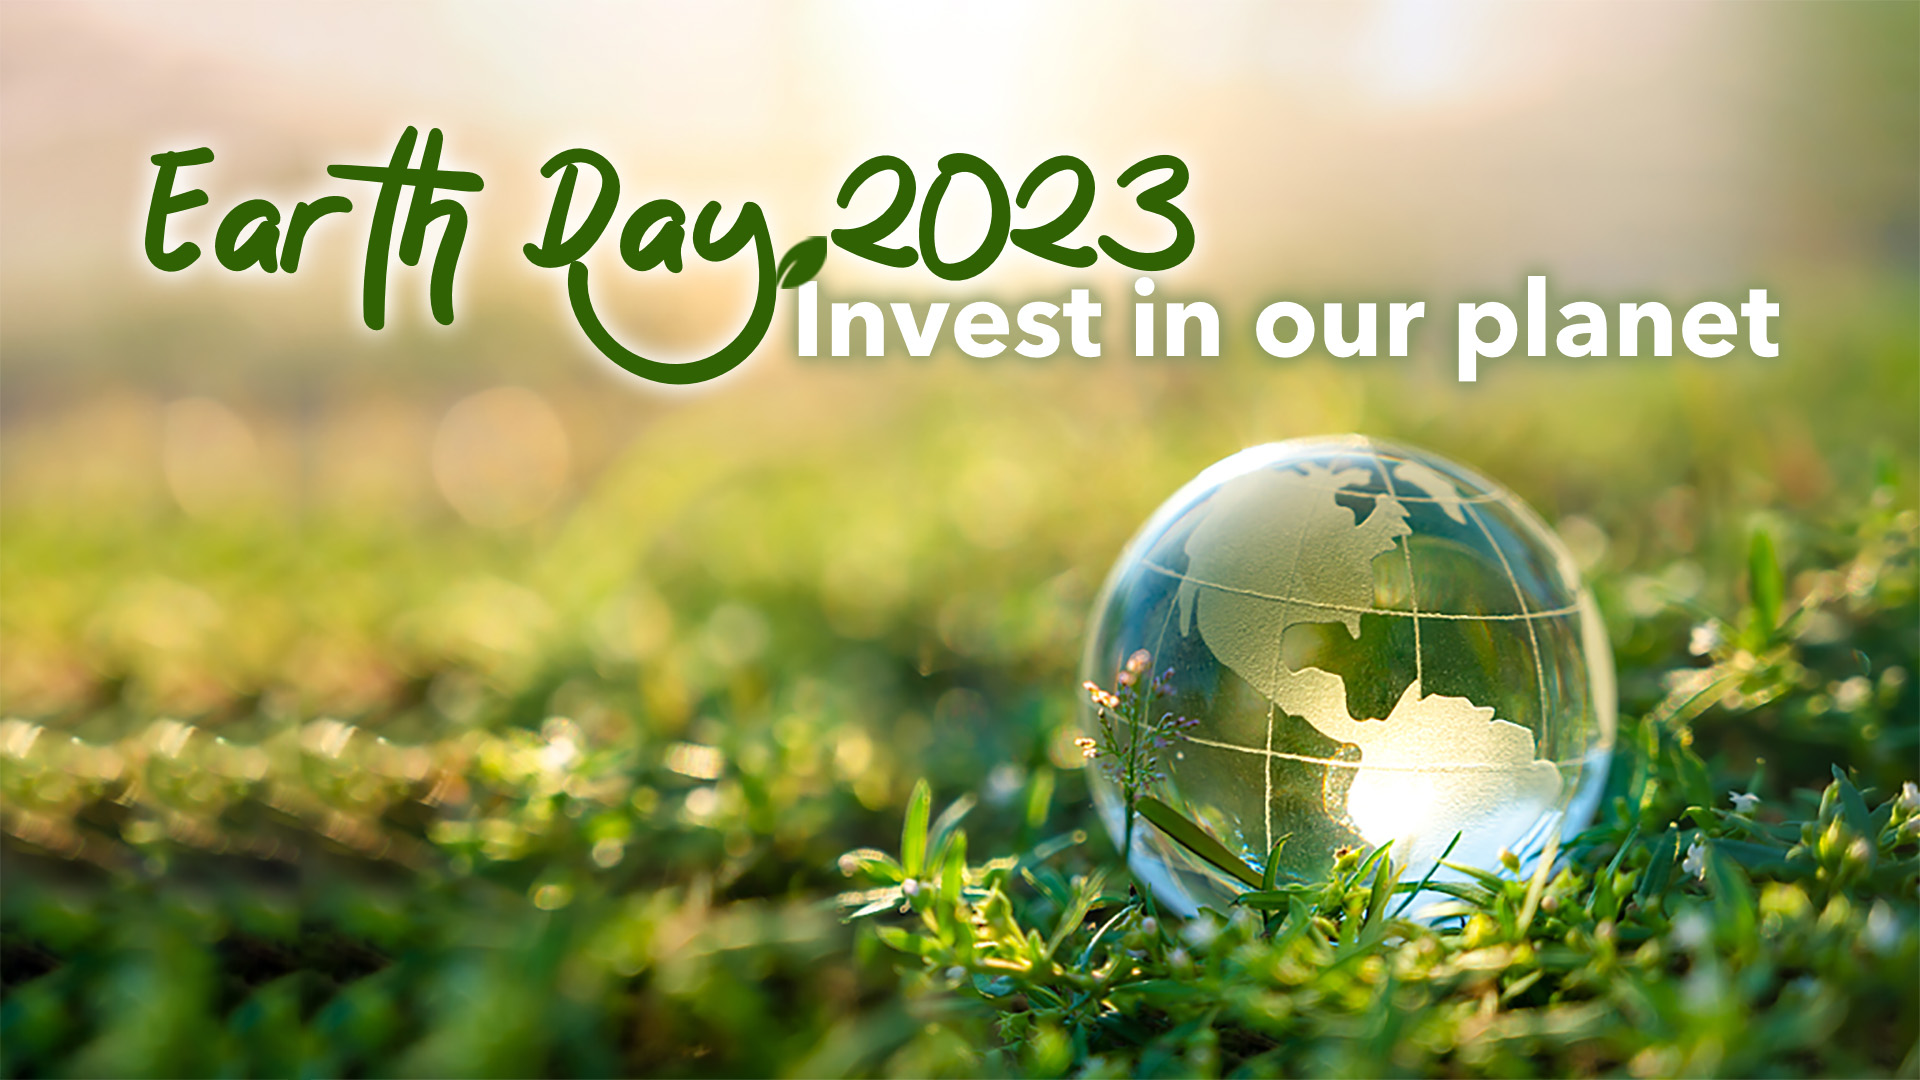 Earth Day 2023: Invest in our planet